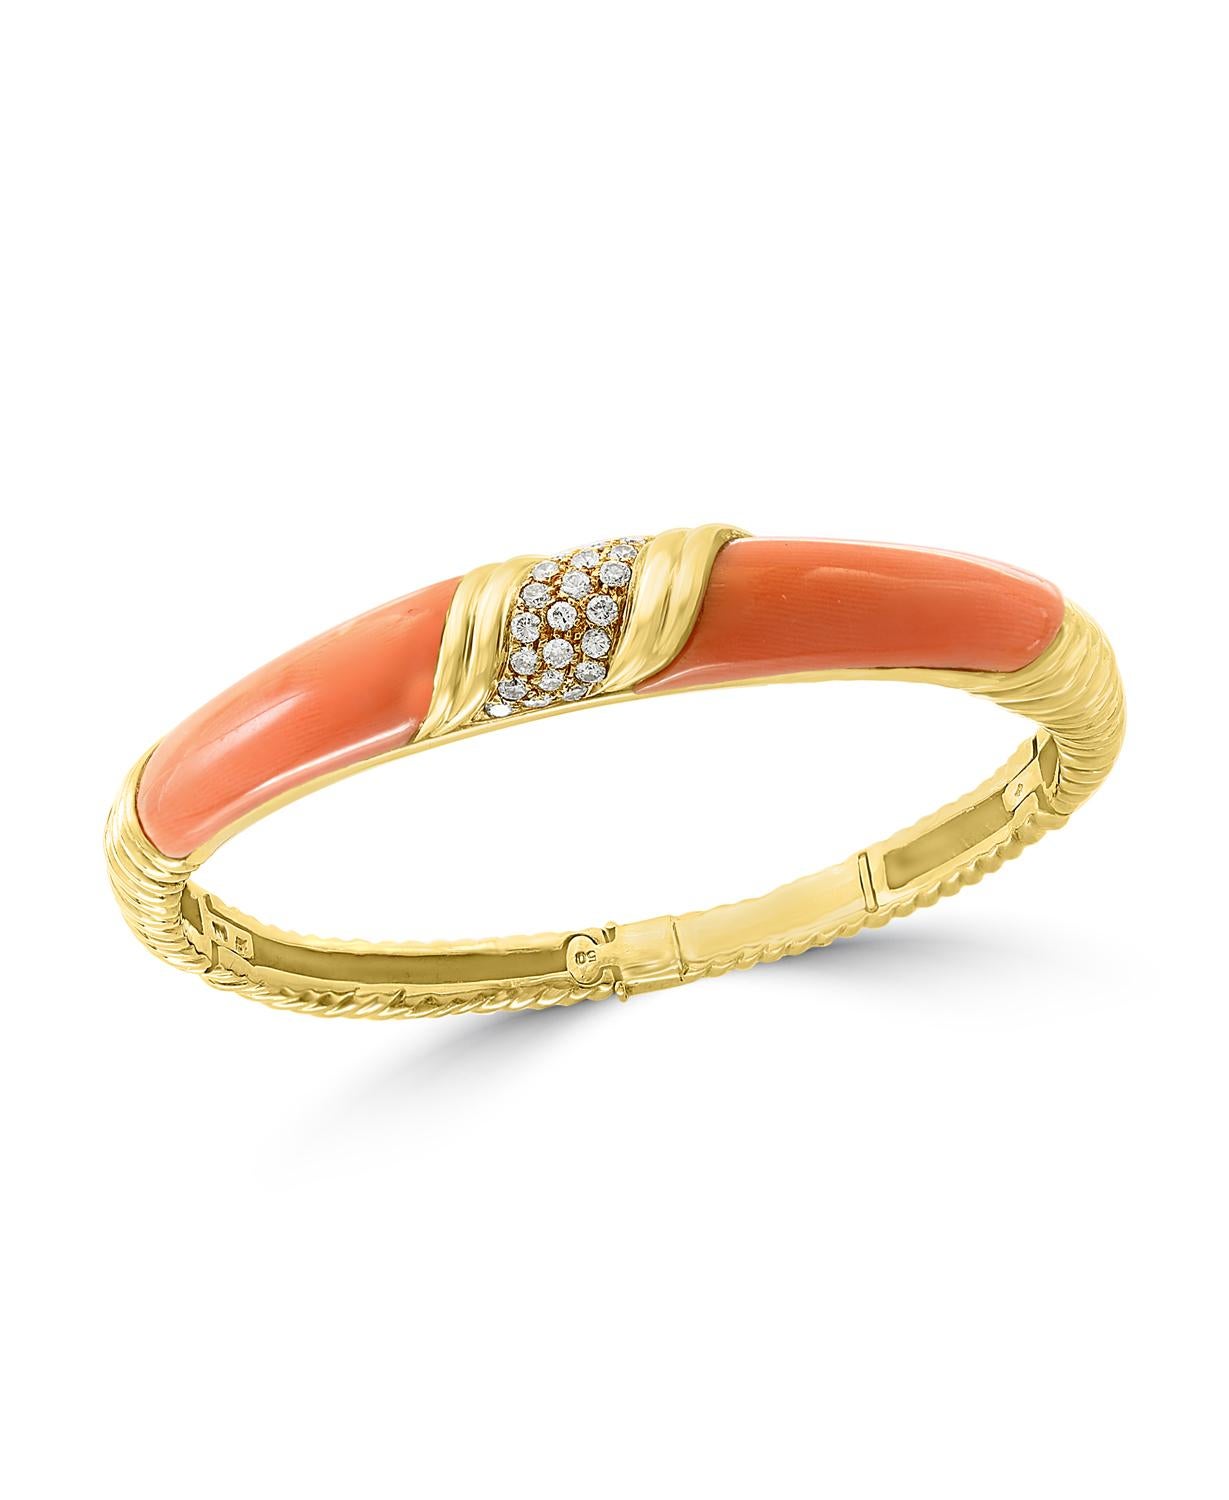  A spectacular jewelry piece.  This exceptional  and very reasonable in price Bangle bracelet 
 It has two large pieces of natural pink Coral and  approximately  0.80 ct. brilliant diamonds  
The  Bangle bracelet is expertly crafted with 23 grams of